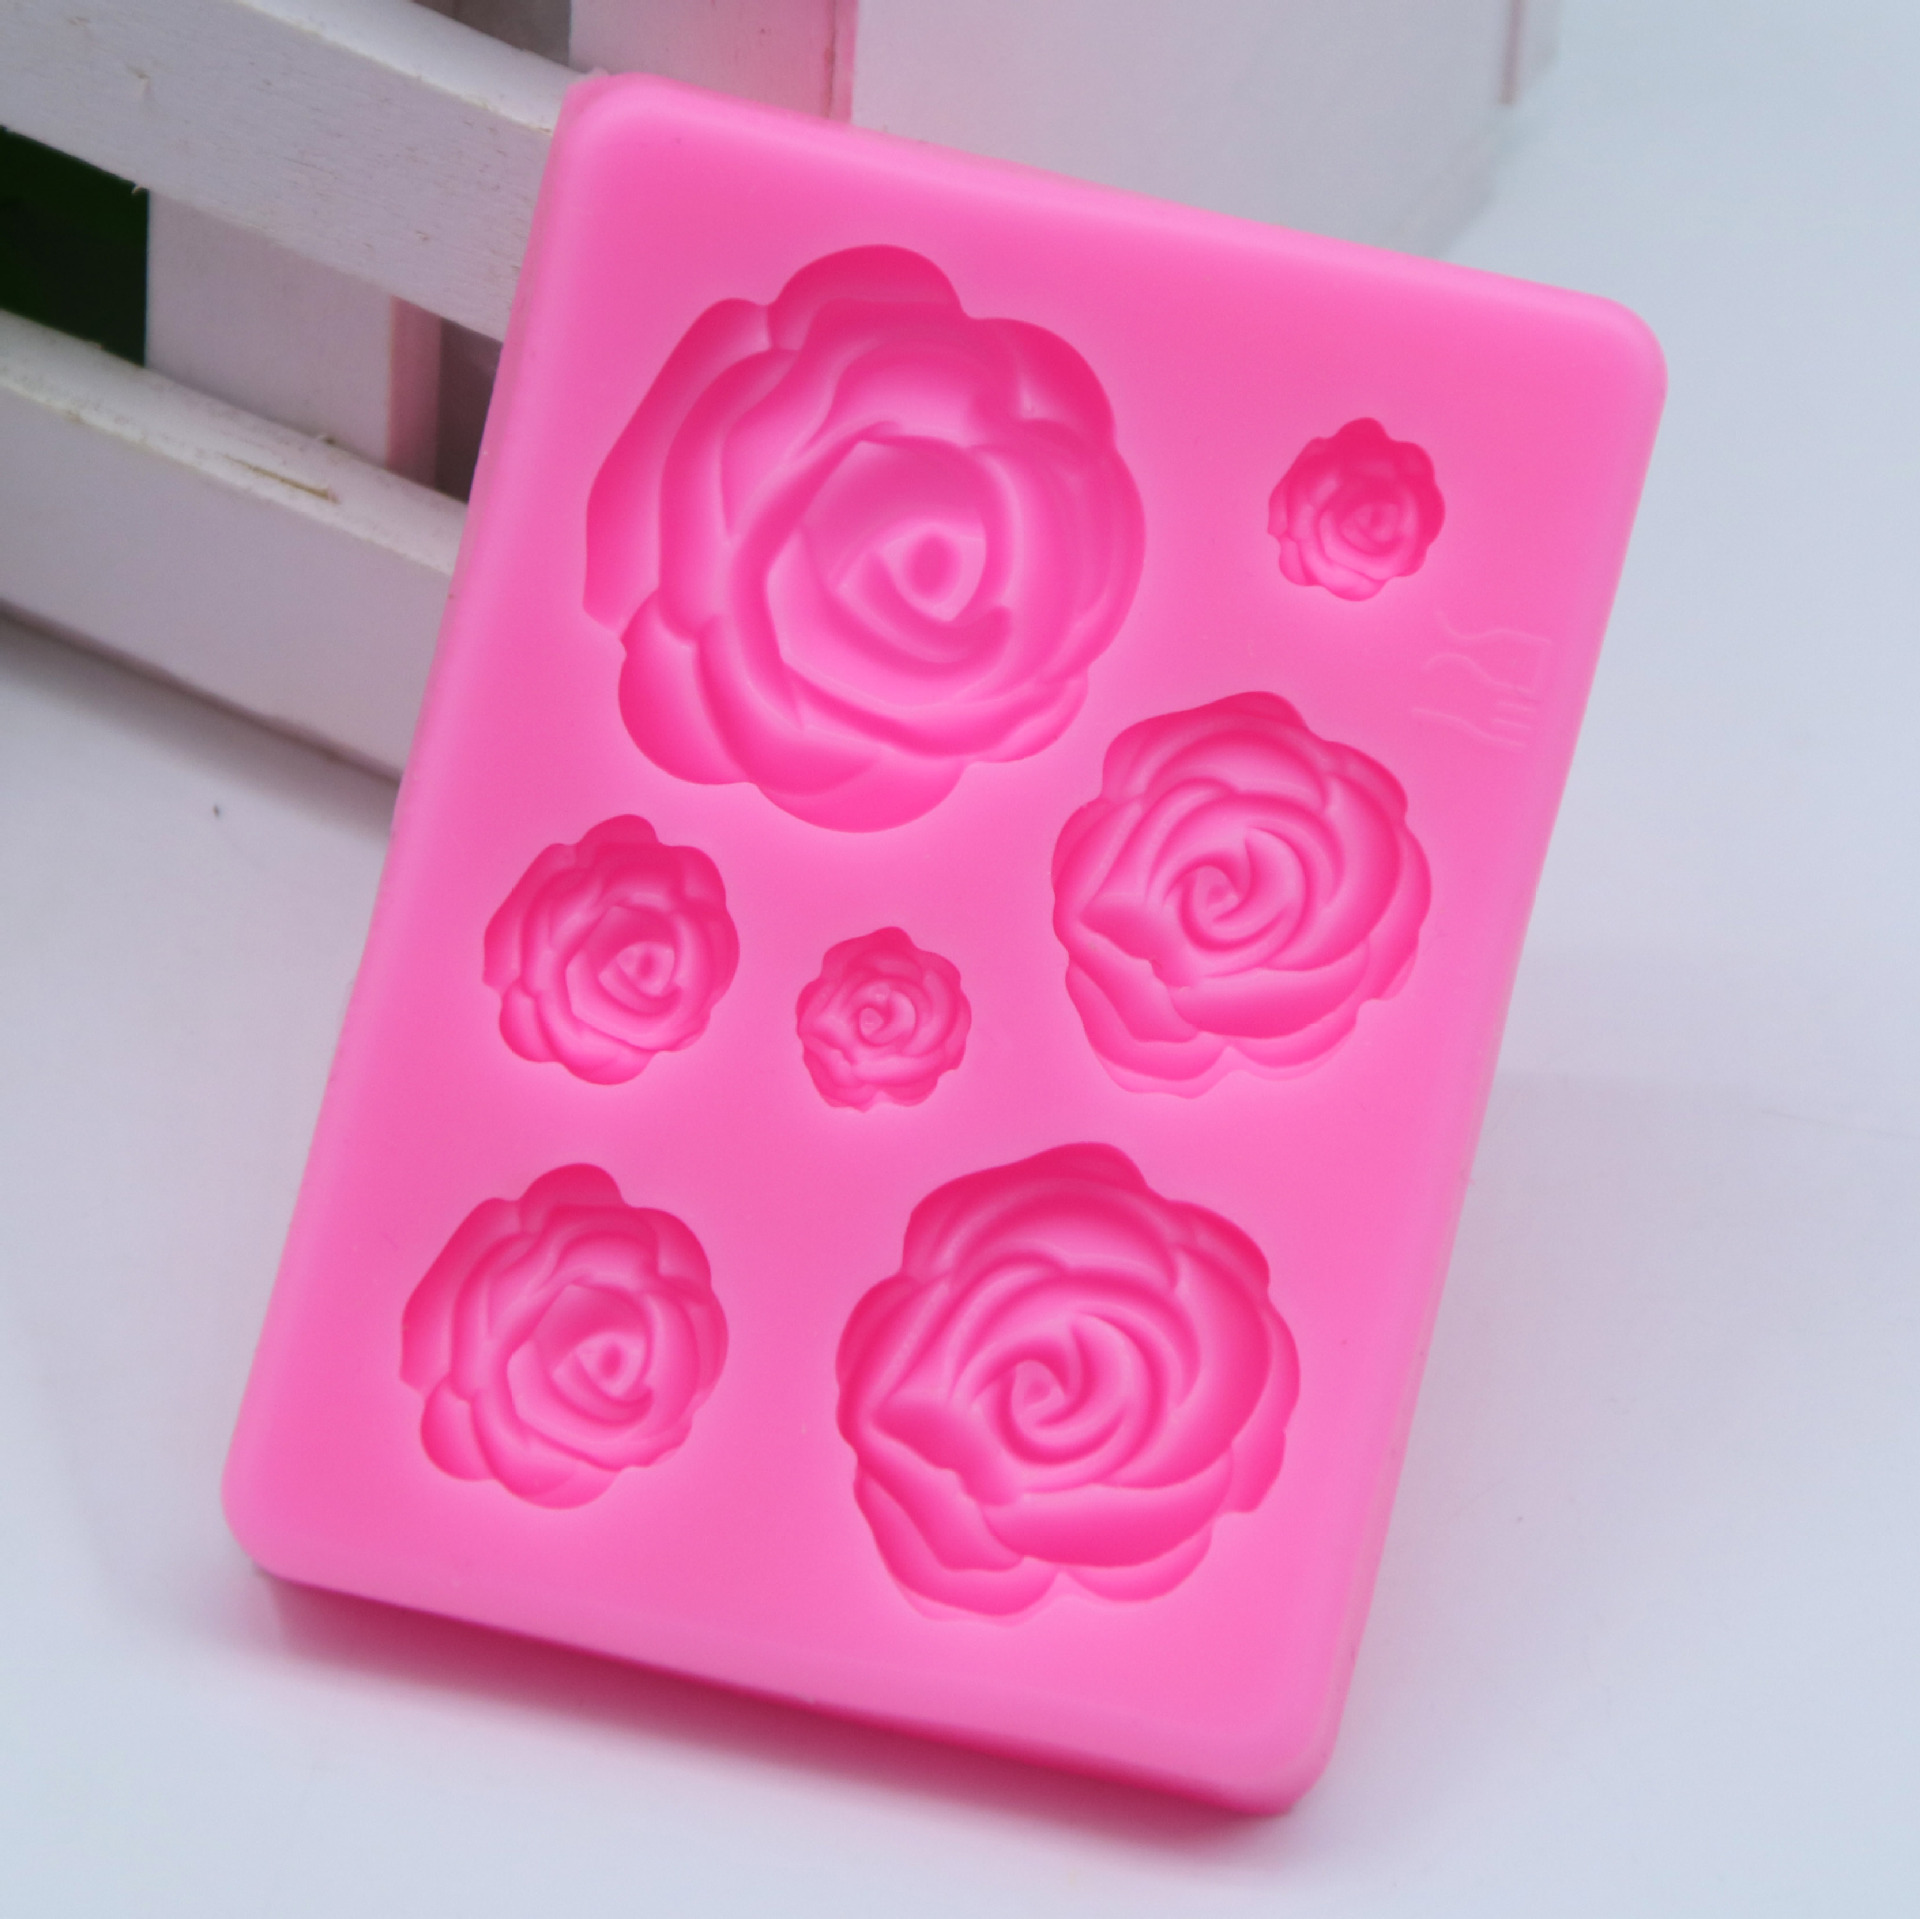 Large, medium and small 7 even 3D rose flower silicone mold sugar chocolate cake mold